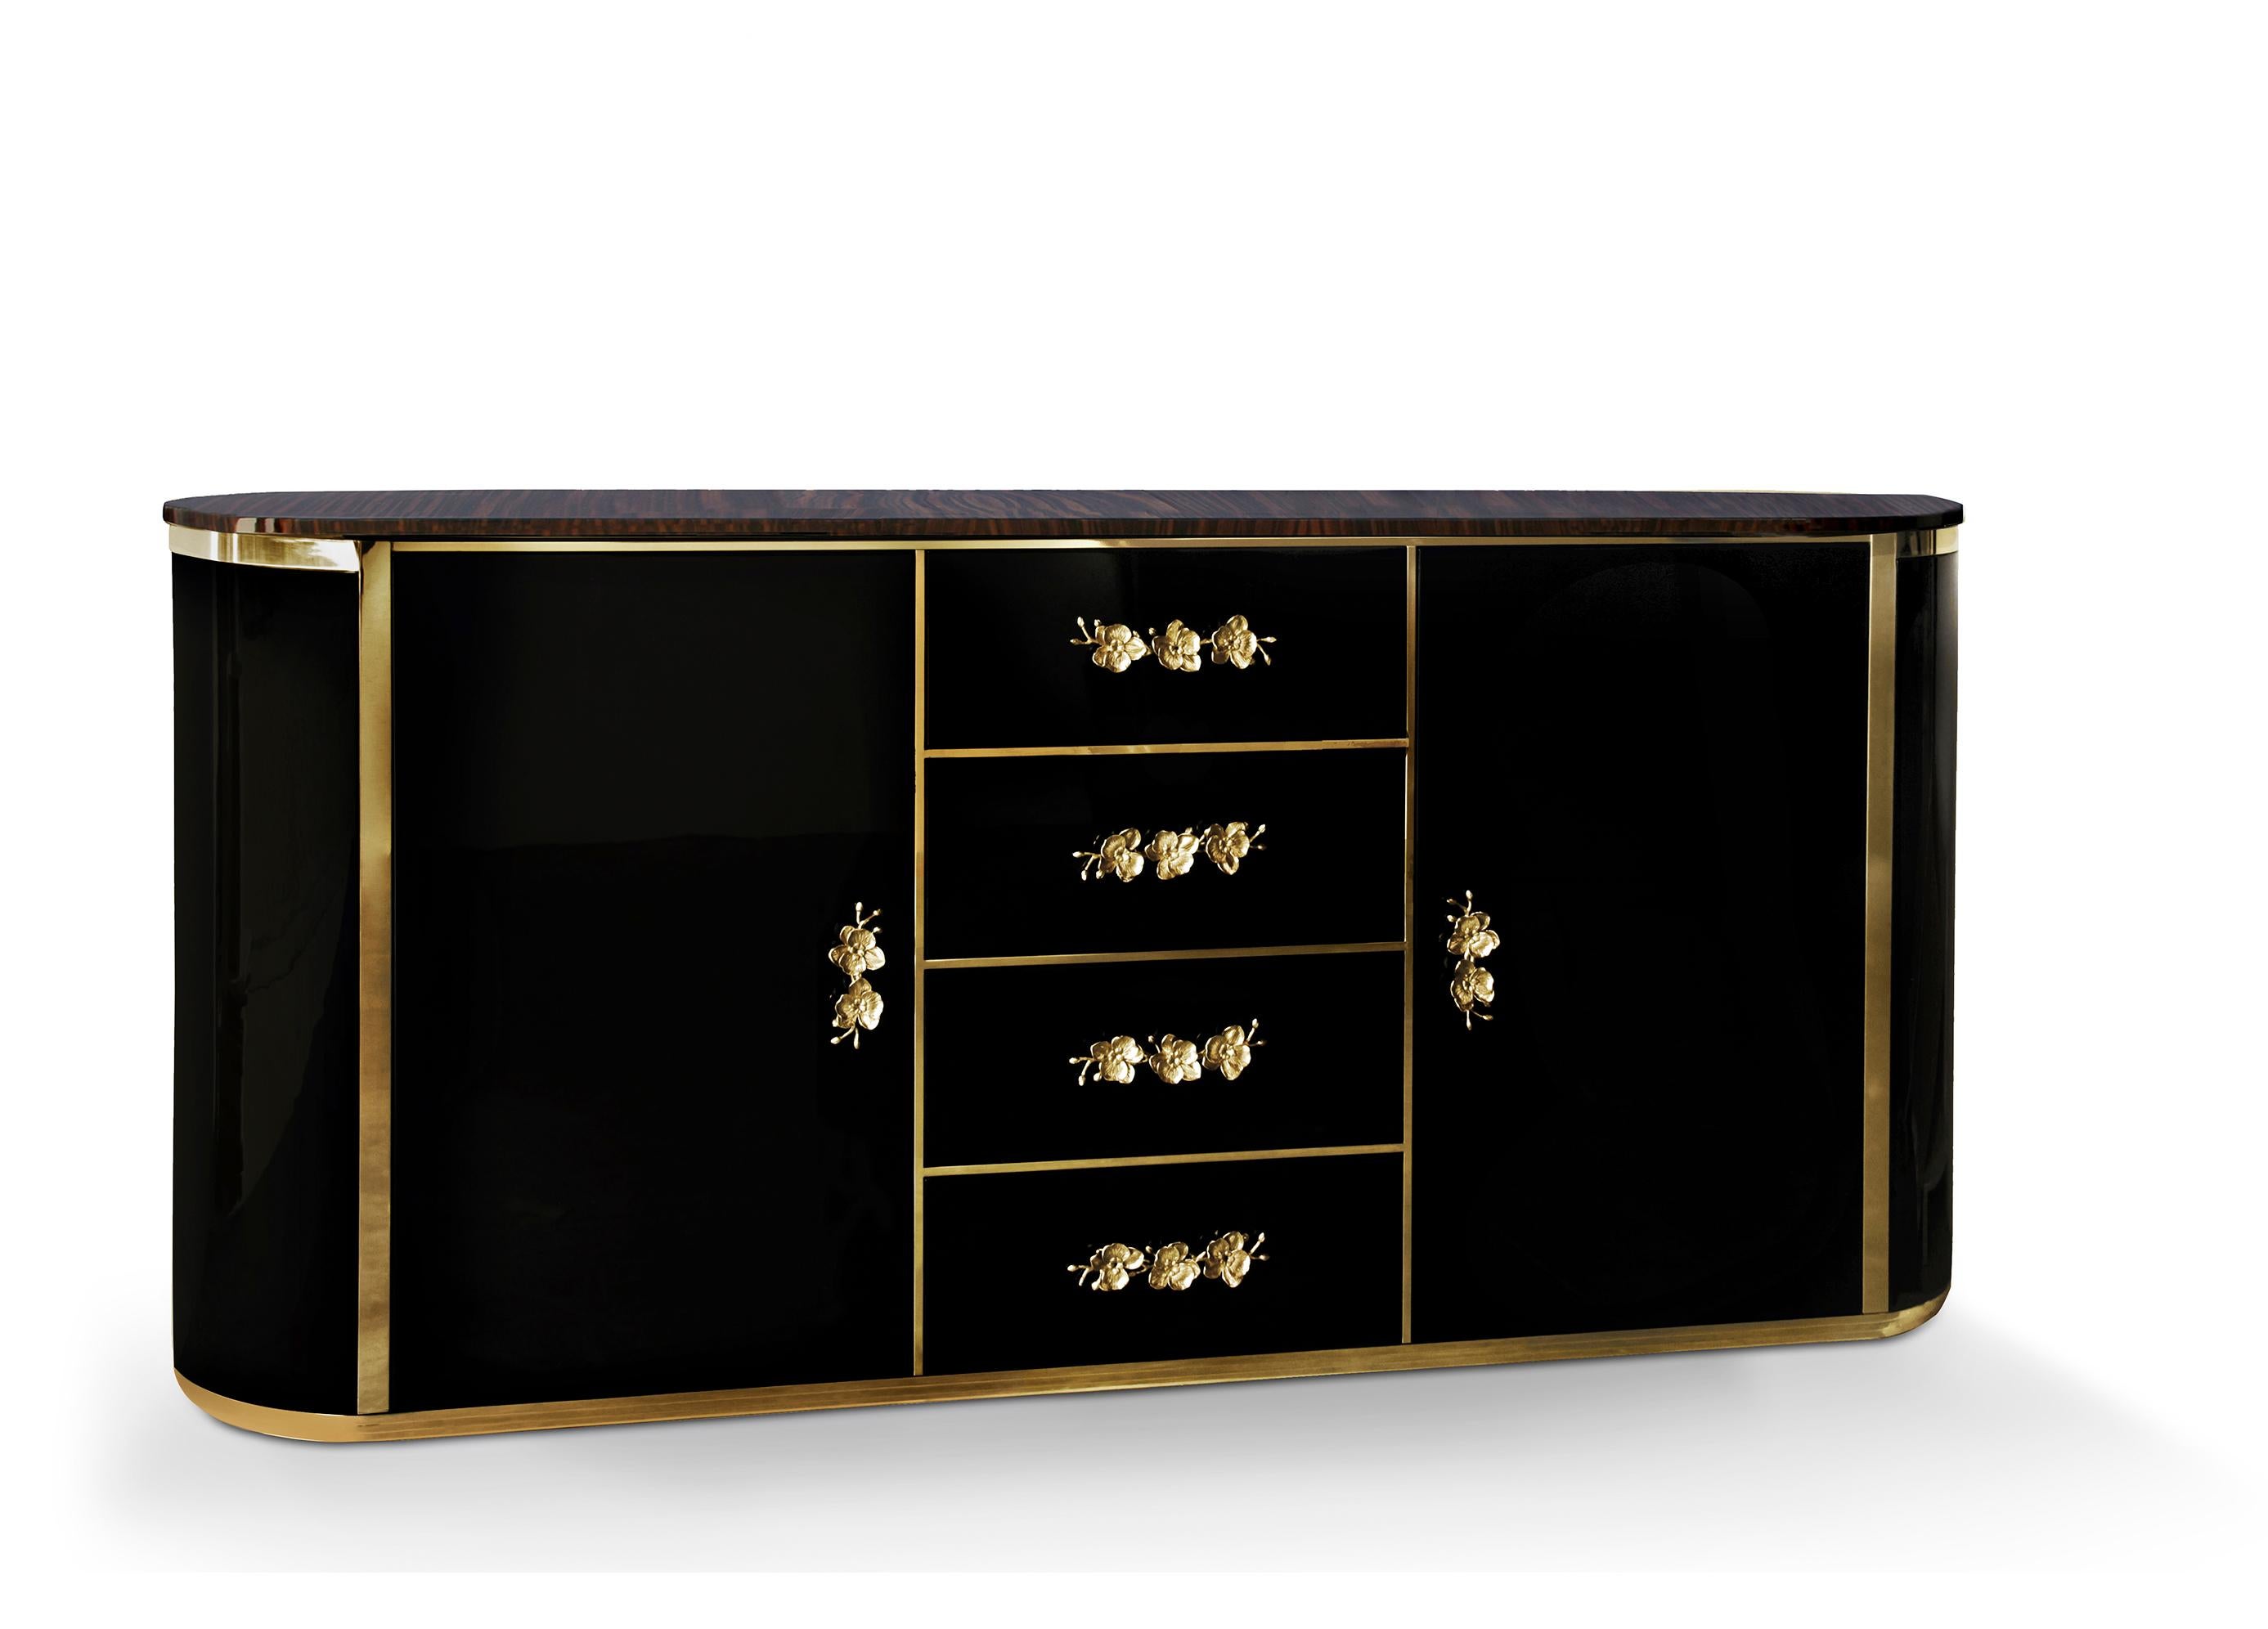 The vintage-inspired drama of this elegant chest captures the essence of haute style. Sensuous curves and subtle gilt makes the Orchidea an irresistible choice. The oval body is covered in a high gloss lacquer with charming orchid handles adorning